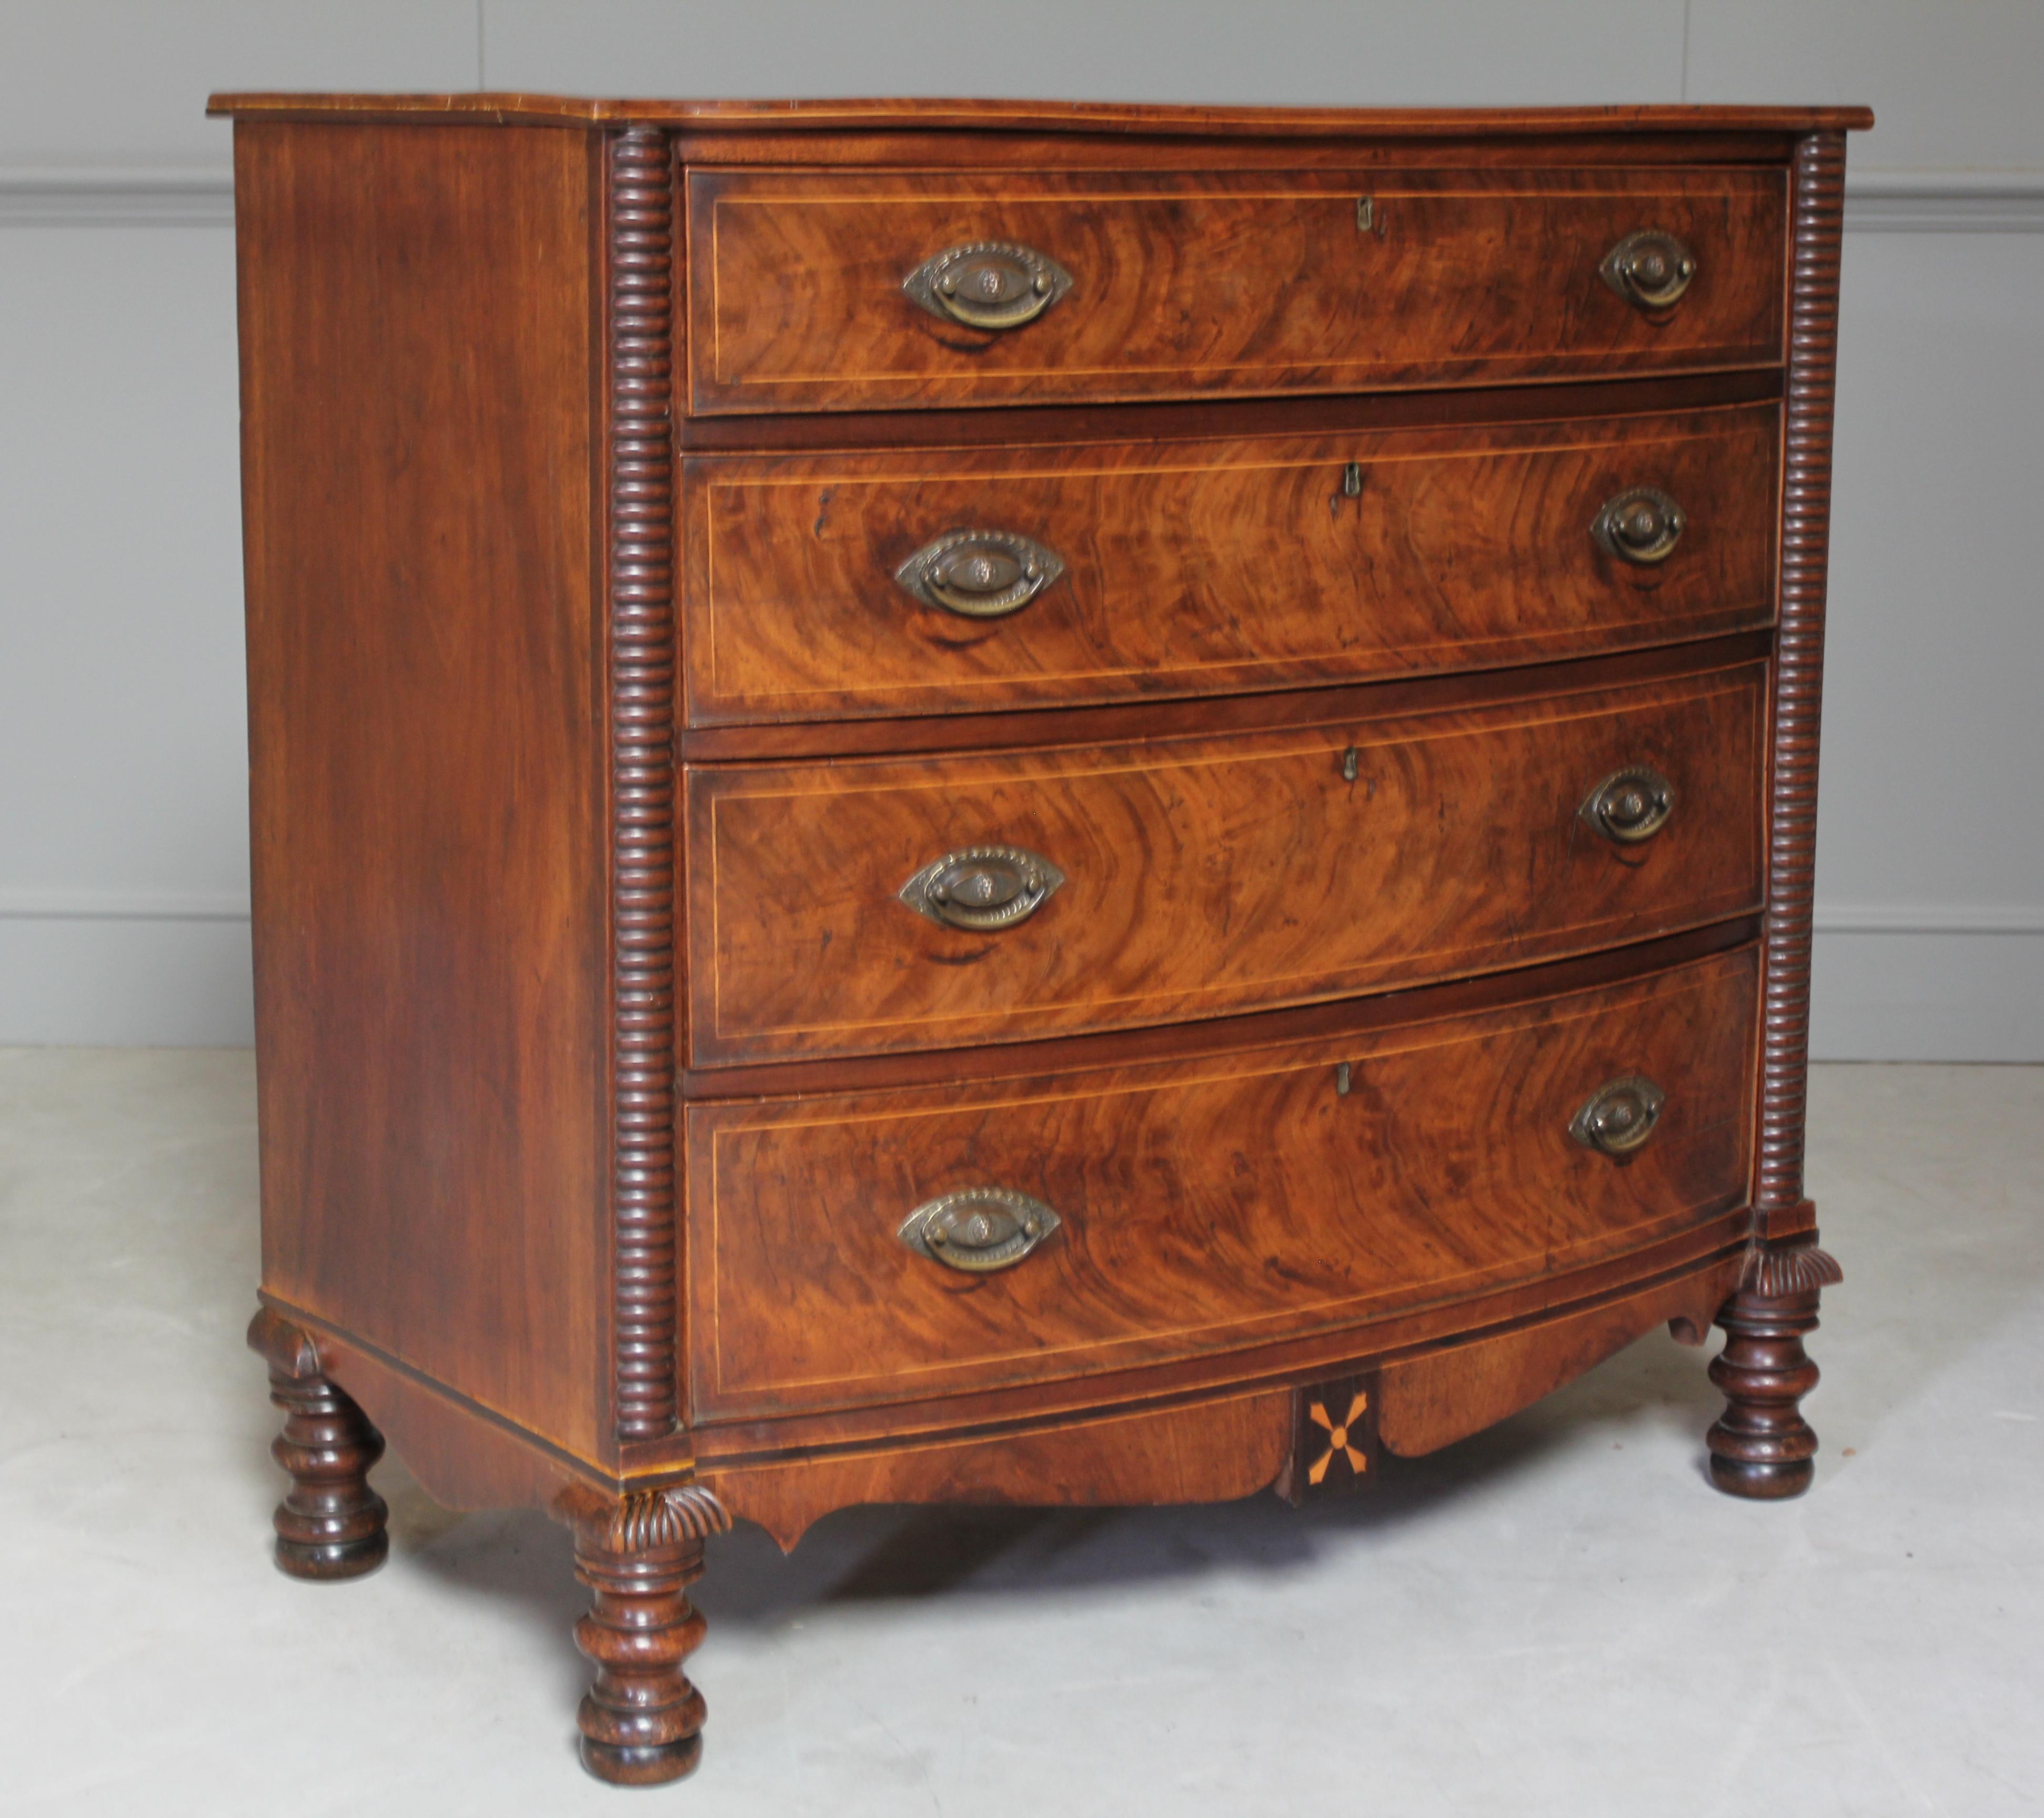 A William IV mahogany chest of drawers, the inlaid top over four long graduated inlaid drawers. on turned feet.
Coming from the short period of King William IV this chest of drawers is truly something special and without doubt offers great value.